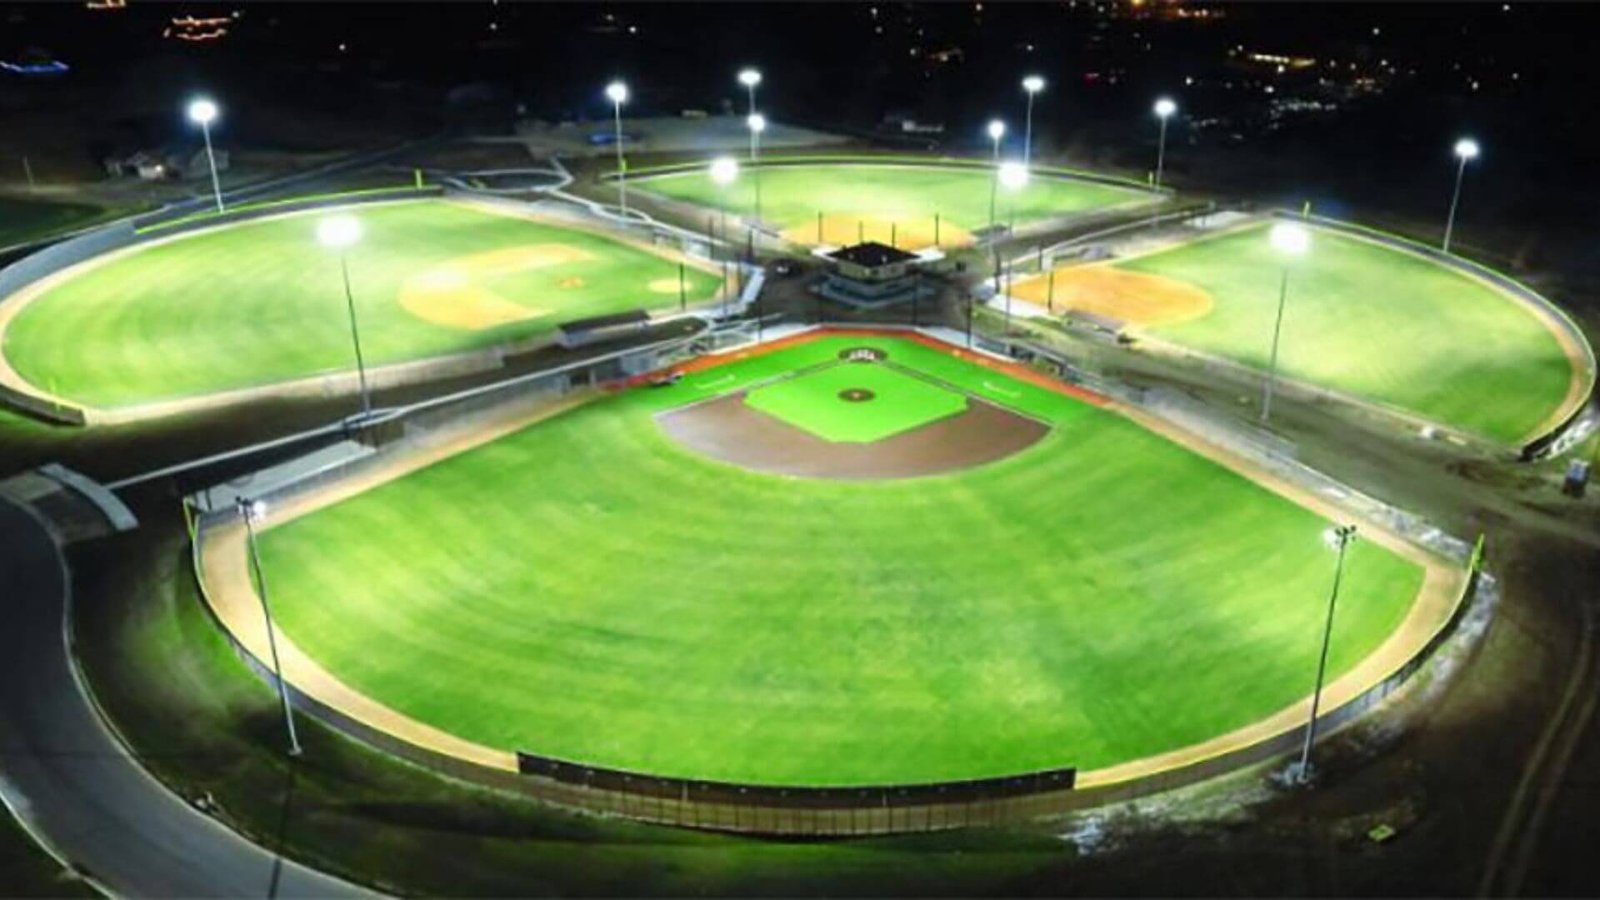 How LED Lighting from Leizur Improves Visibility on the Field